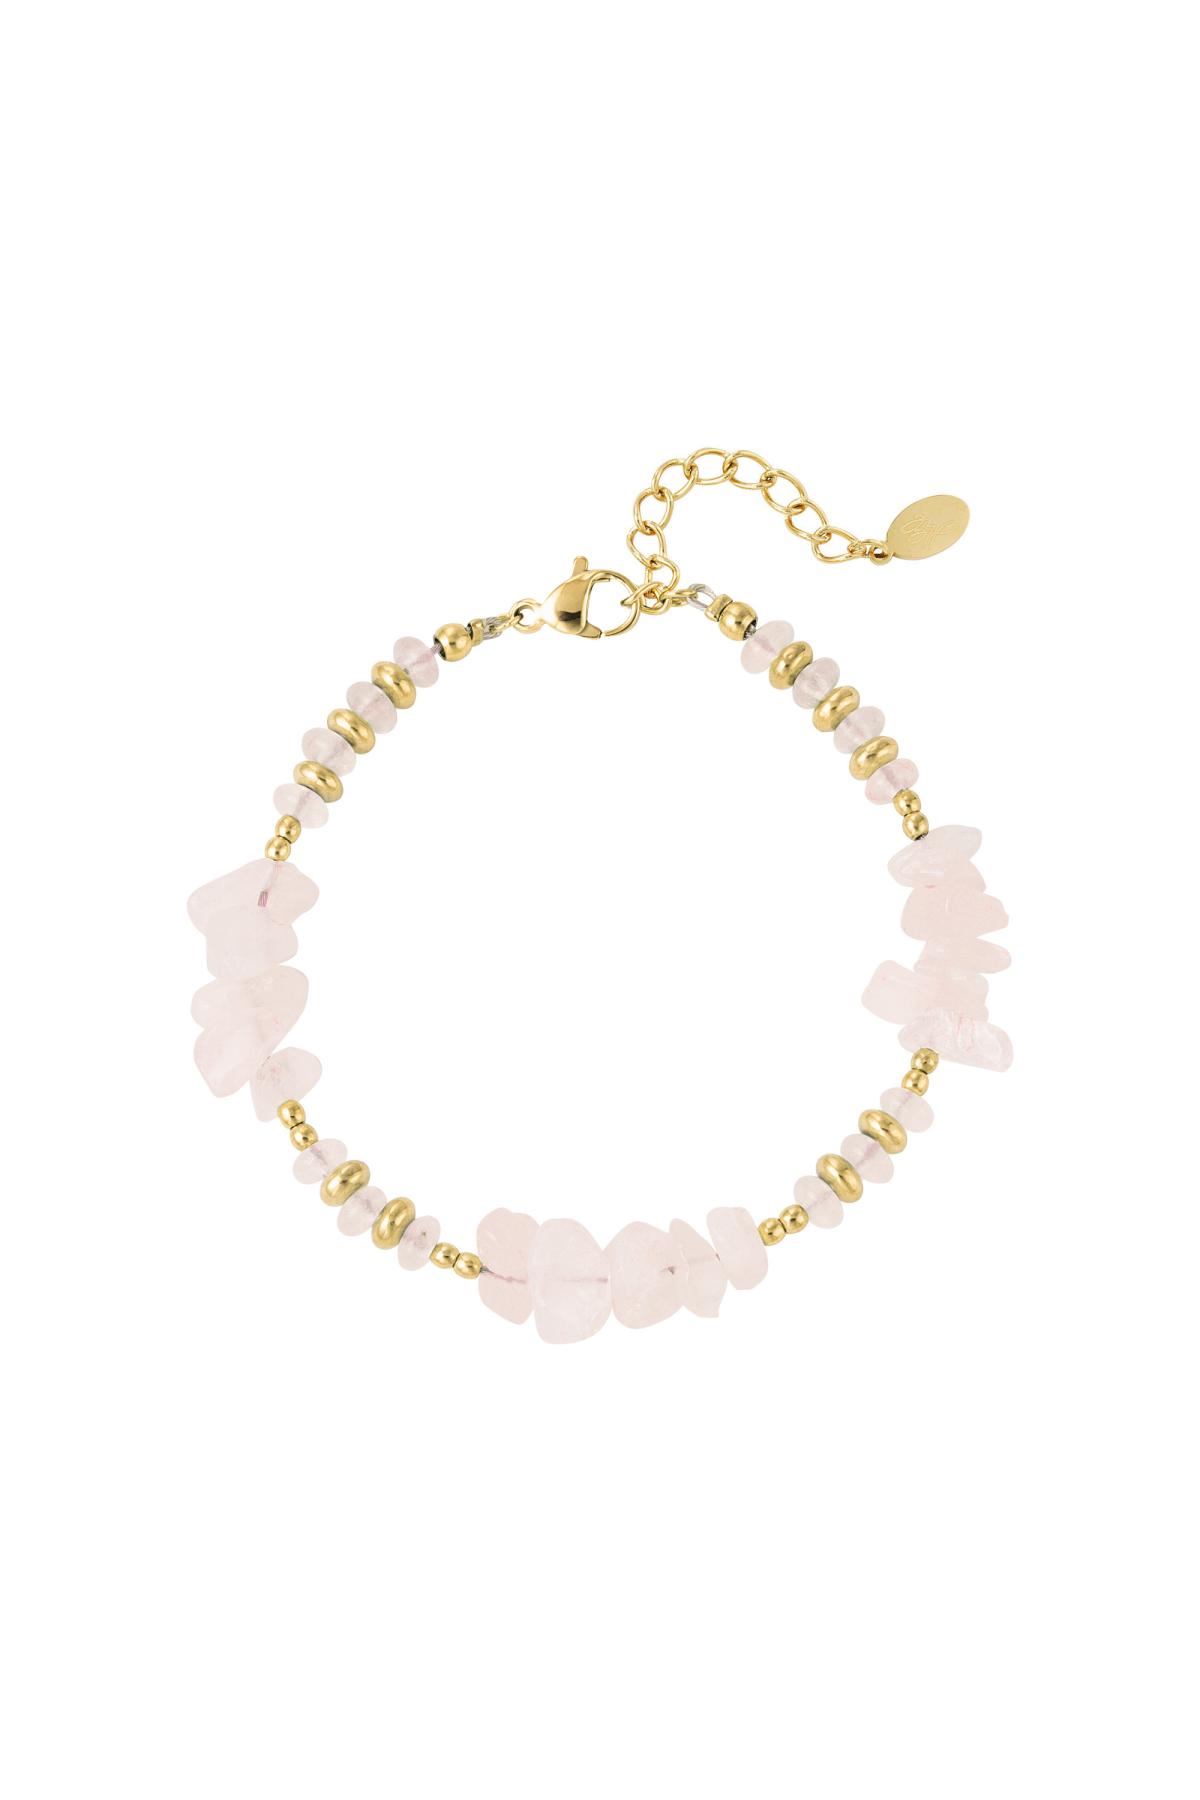 Bracelet different beads - Natural stones collection Pink & Gold h5 